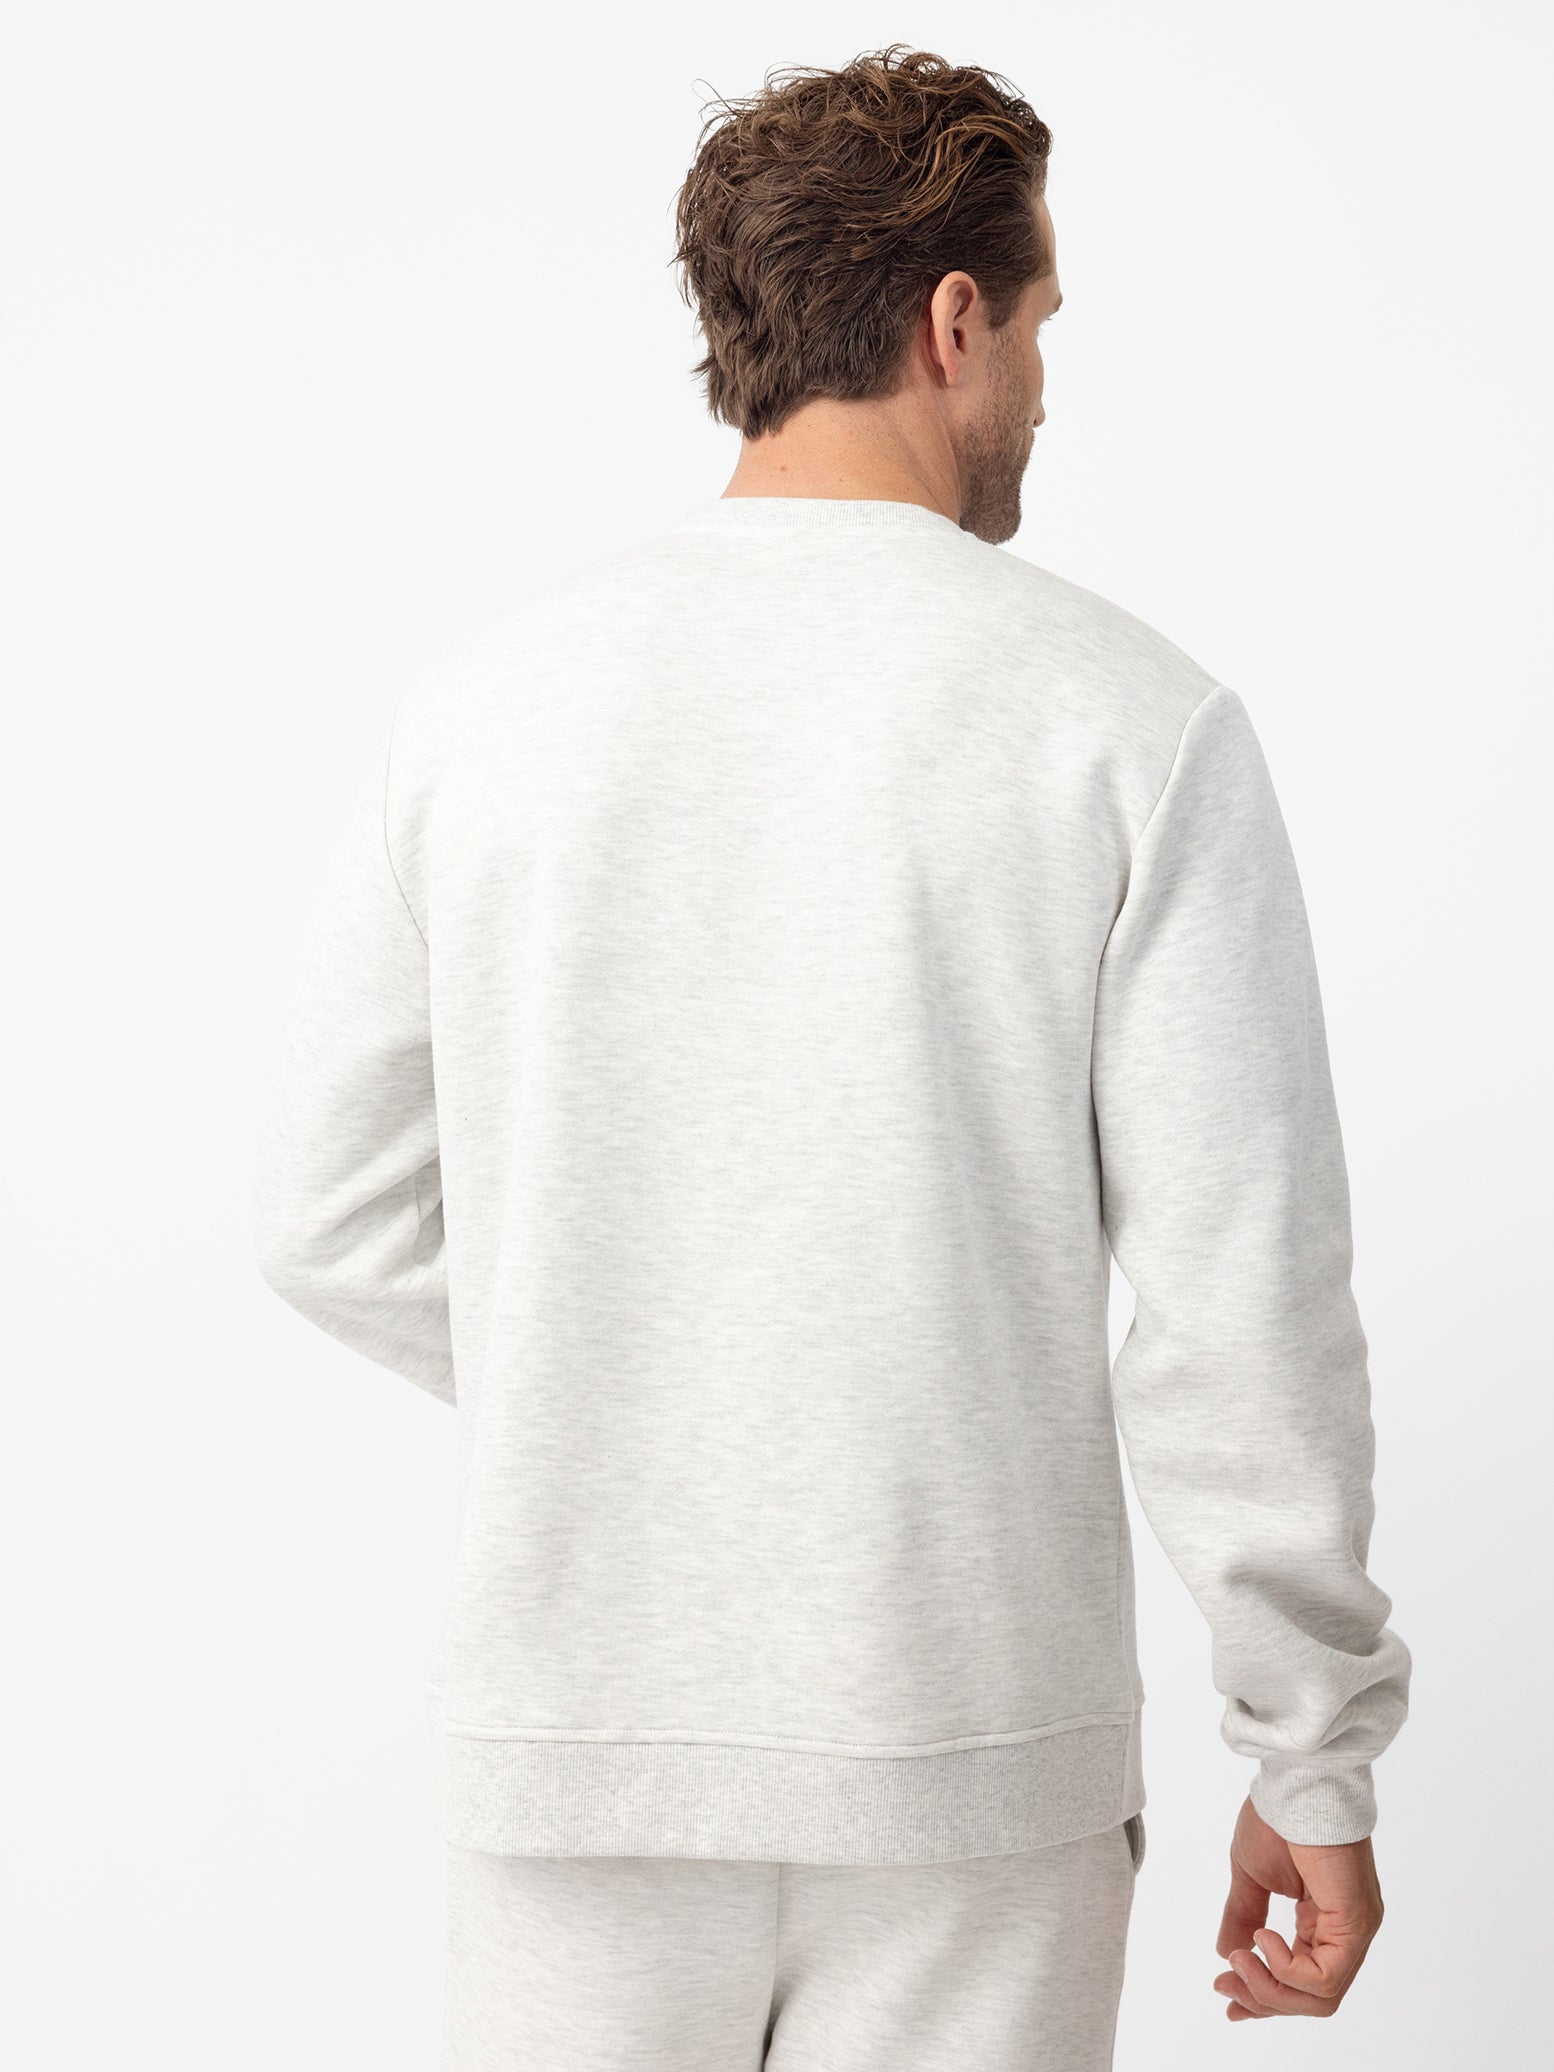 Back of man wearing heather grey cityscape pullover |Color:Heather Grey